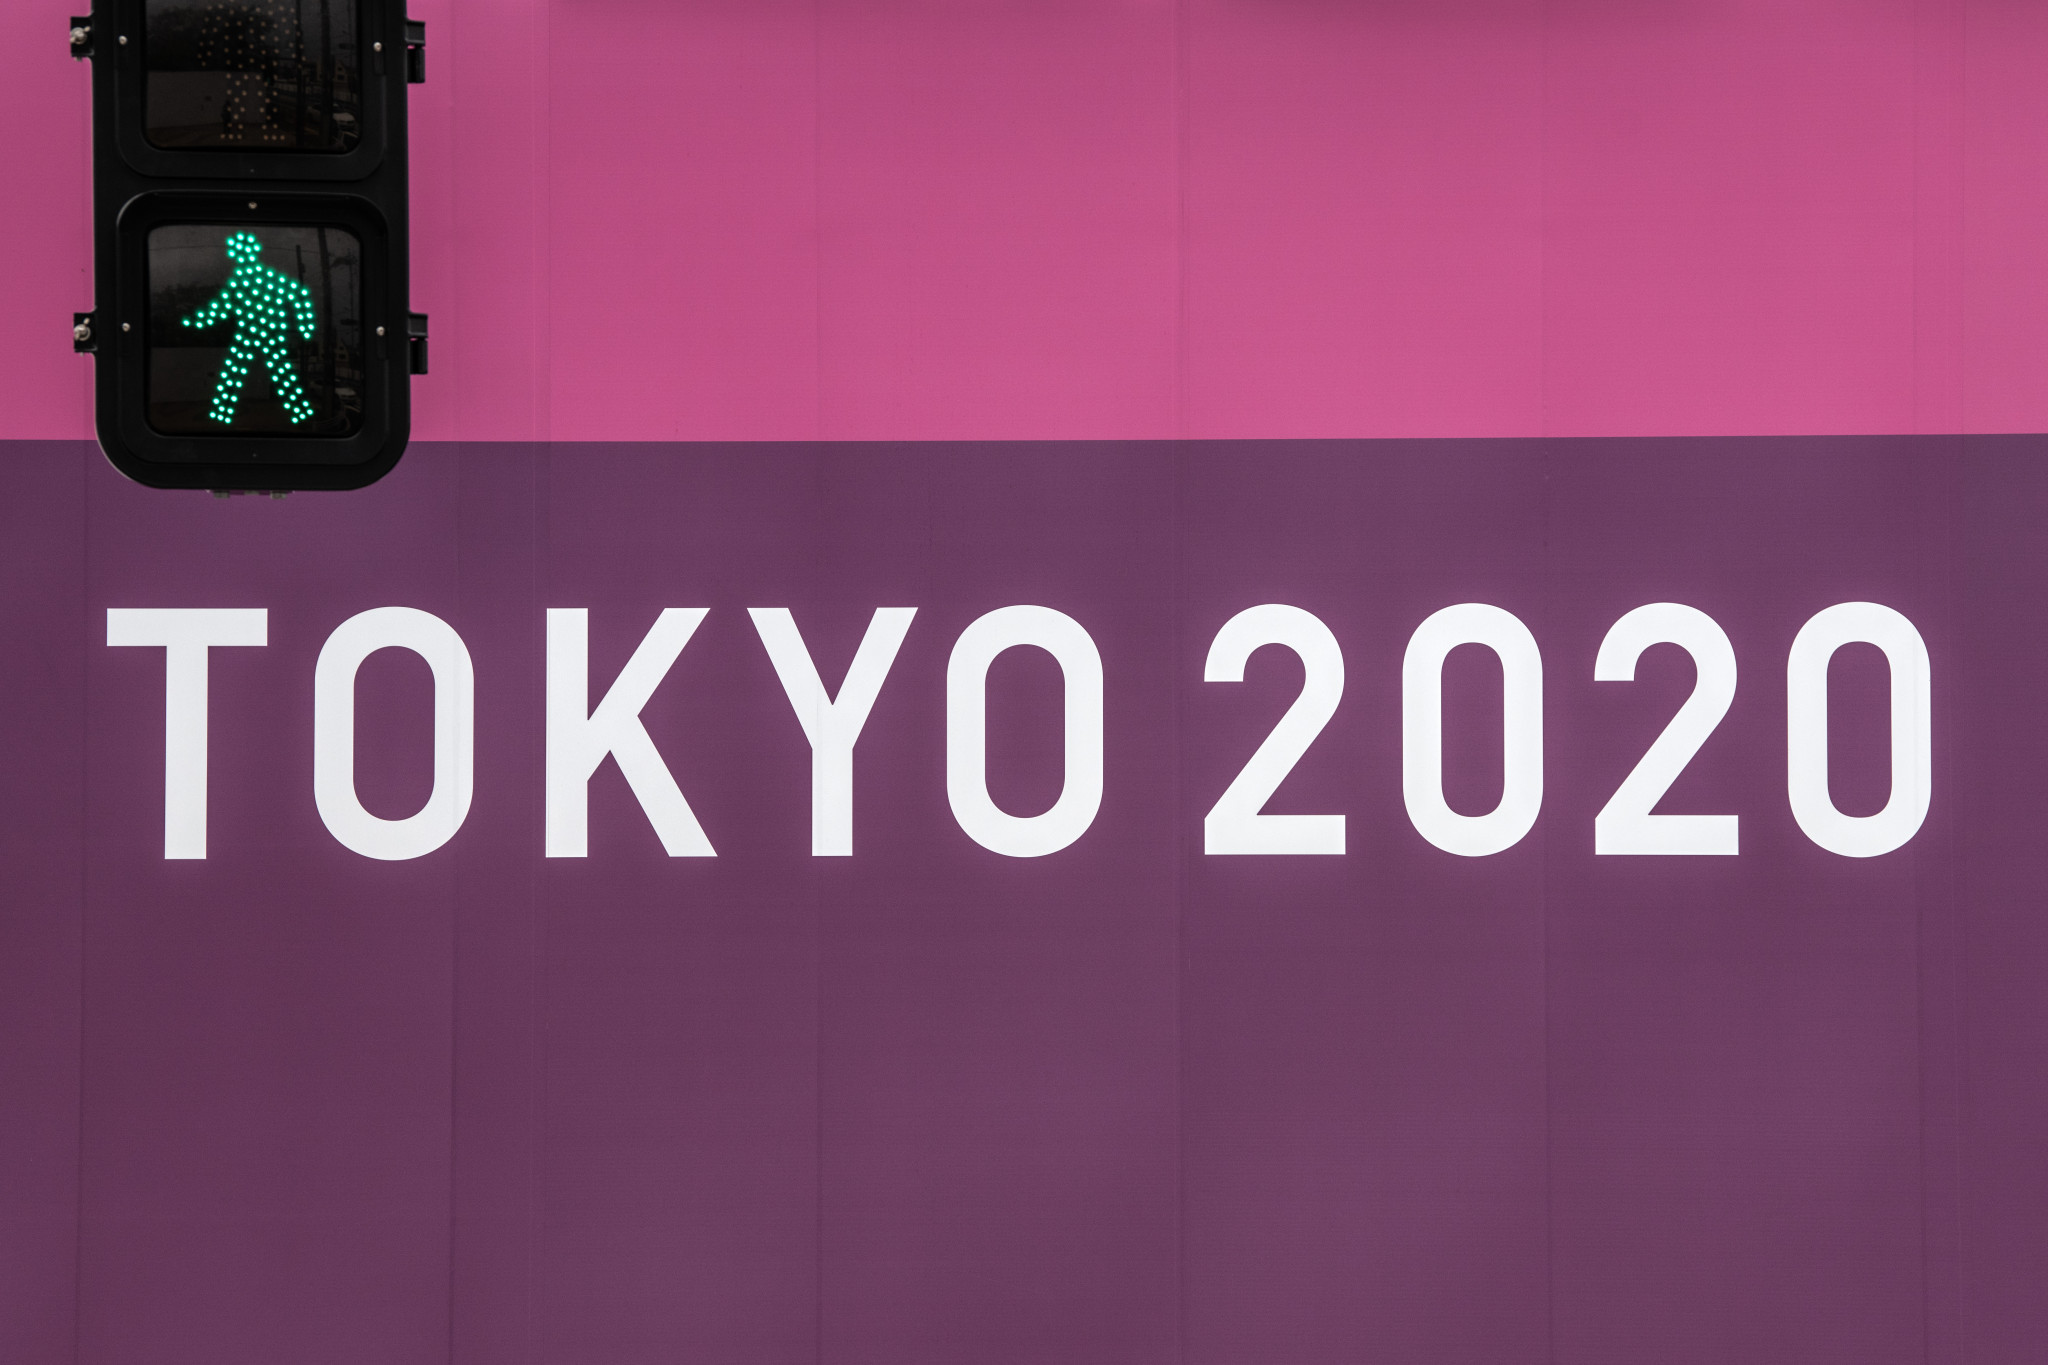 Details of Tokyo 2020 Nippon festival announced